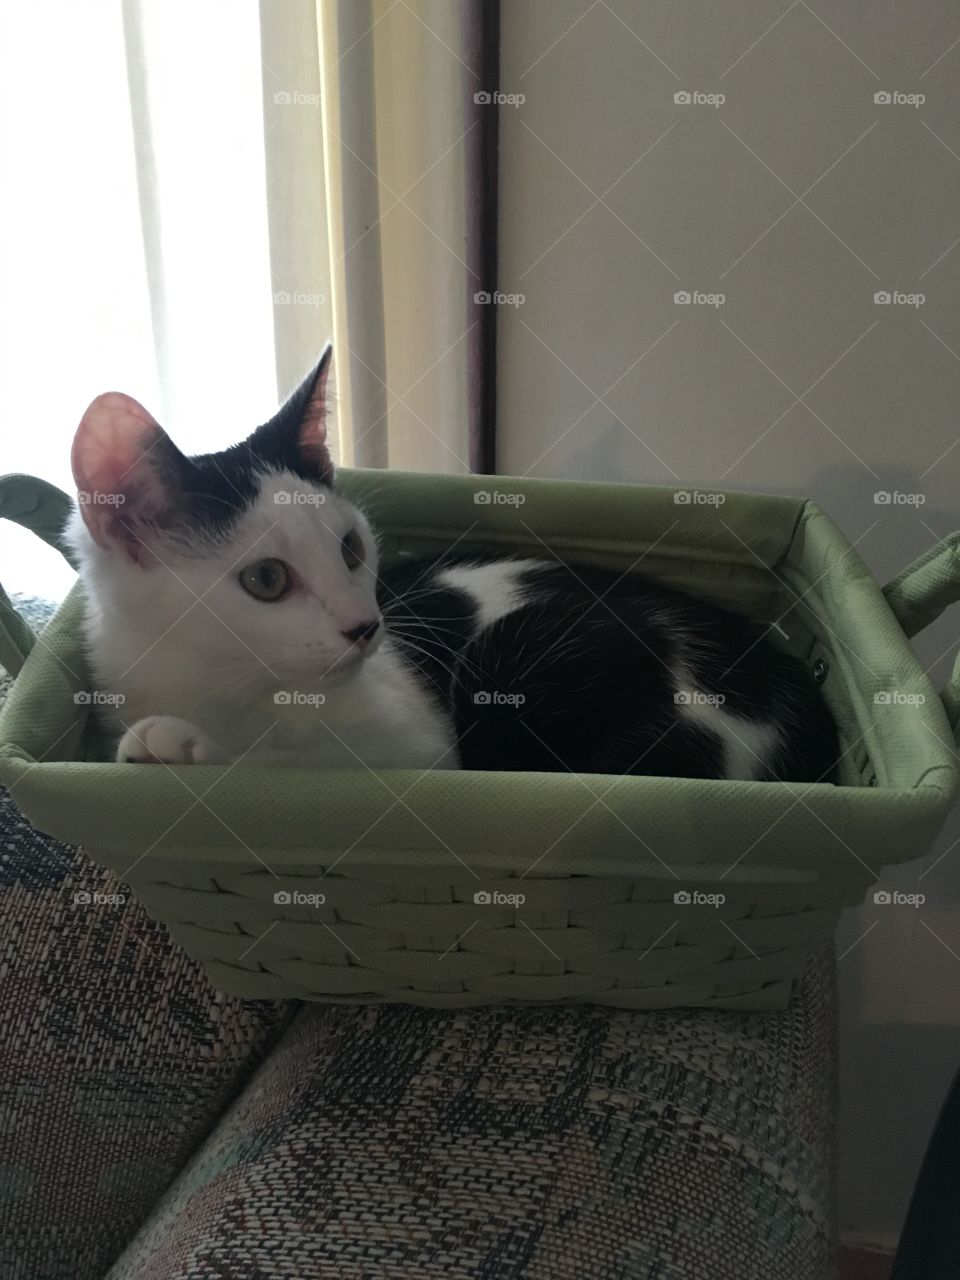 This is a picture of a little kitten in a mint green basket in a house in Ohio.